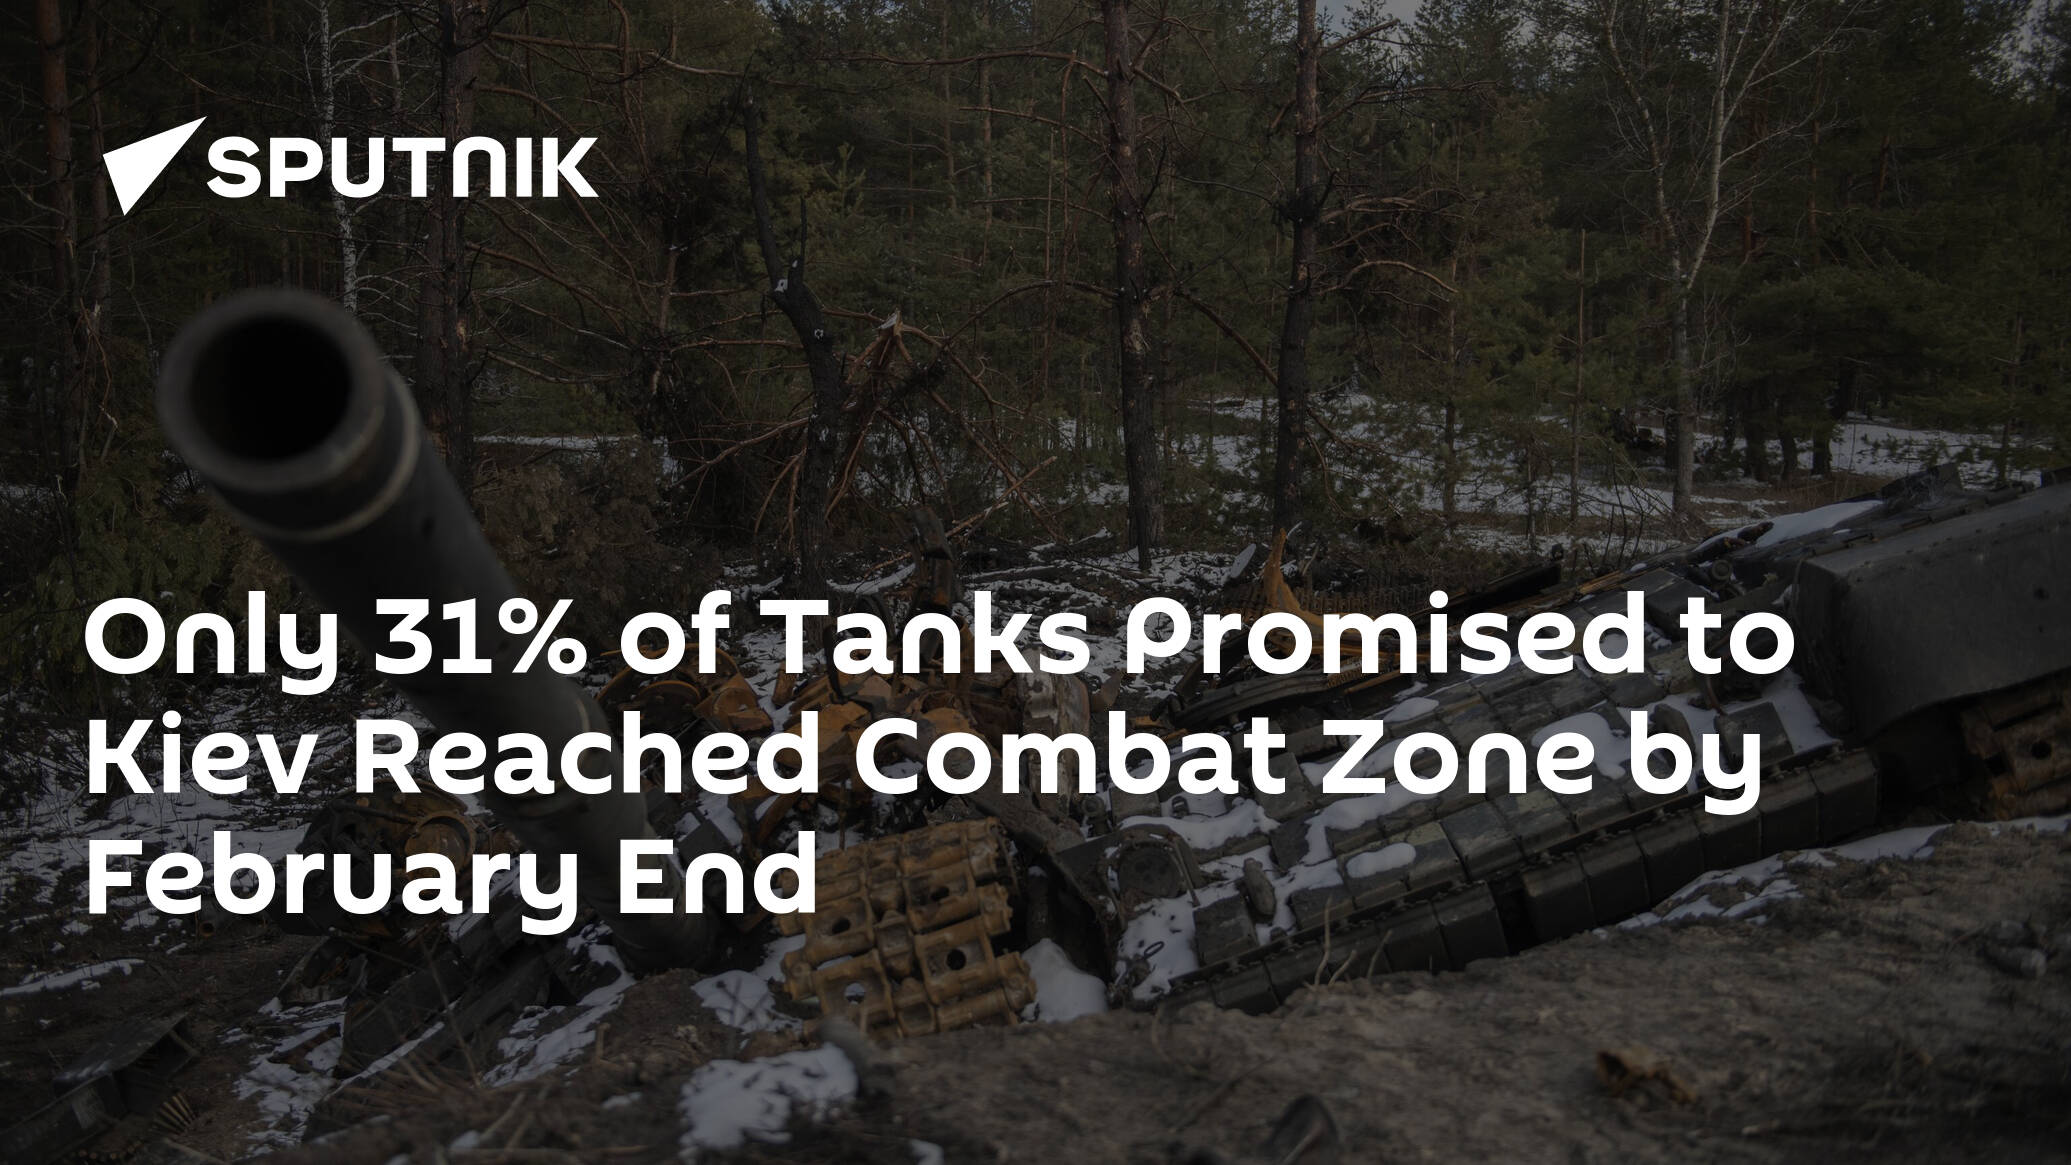 Only 31% of Tanks Promised to Kiev Reached Combat Zone by February End